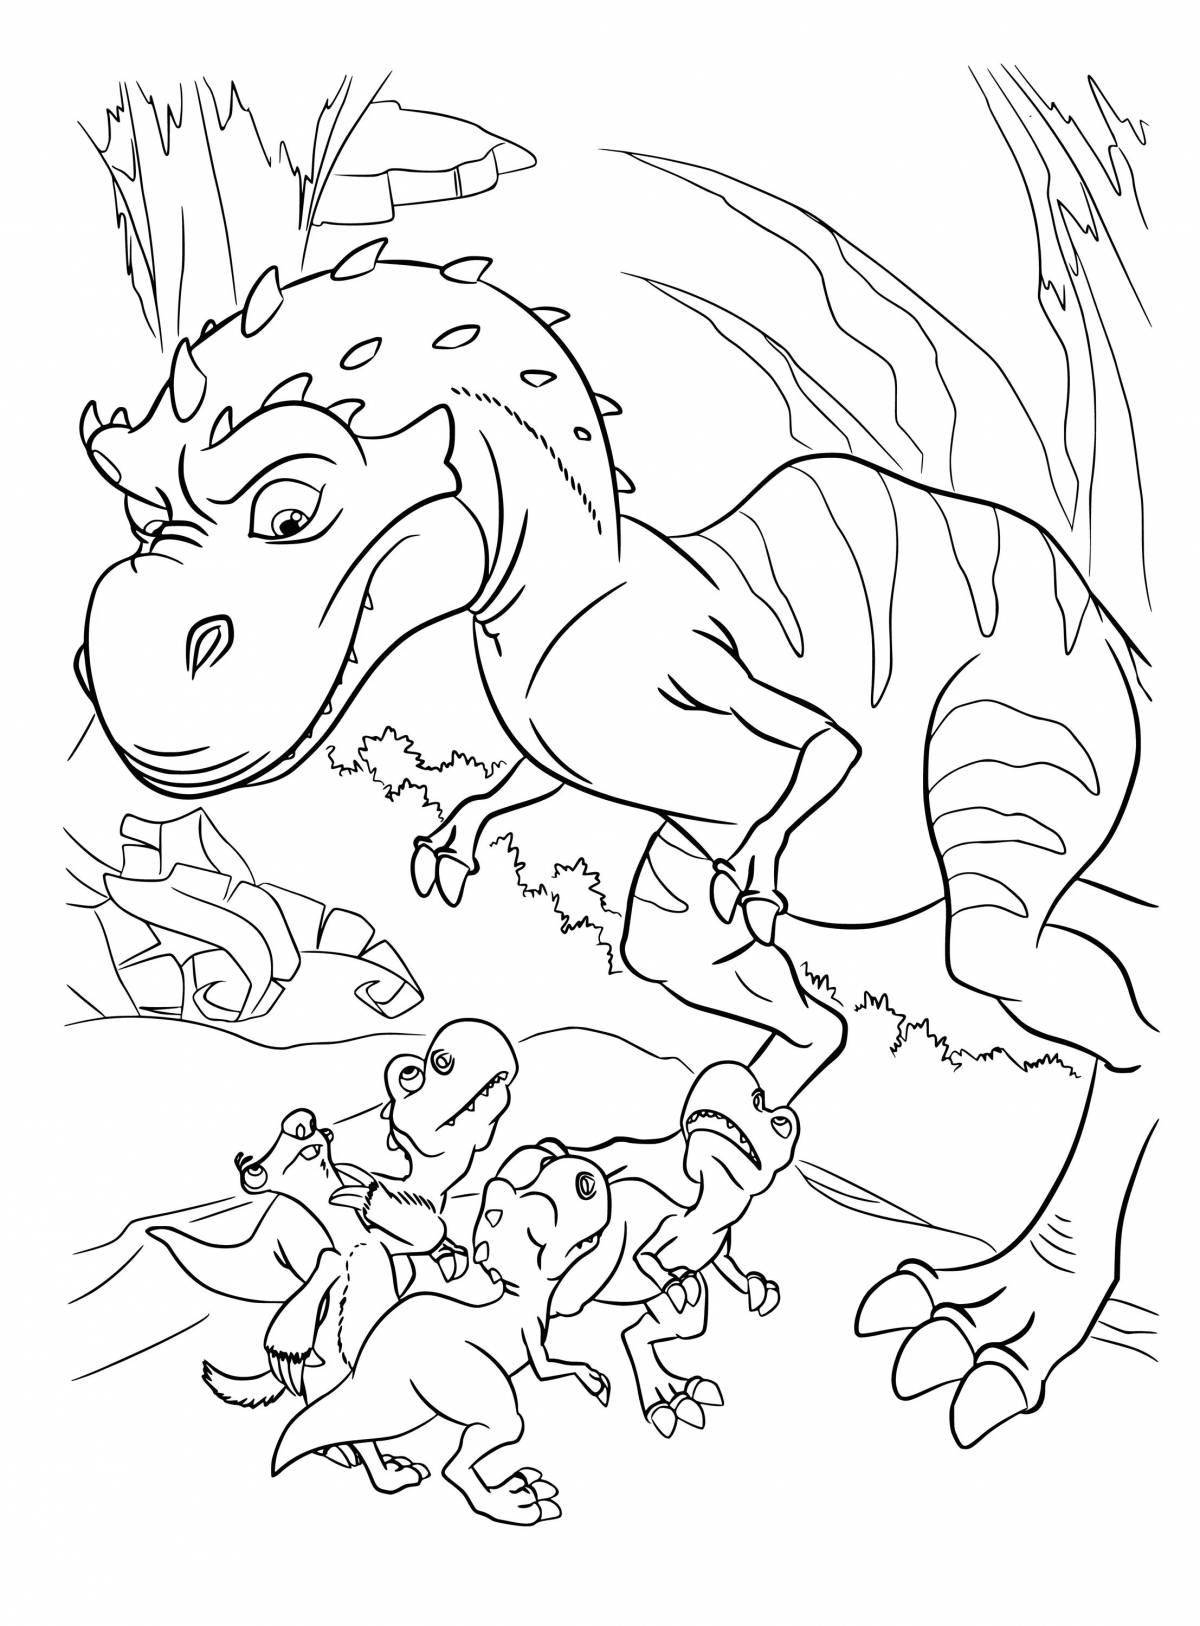 Impressive coloring book ice age 3 age of dinosaurs